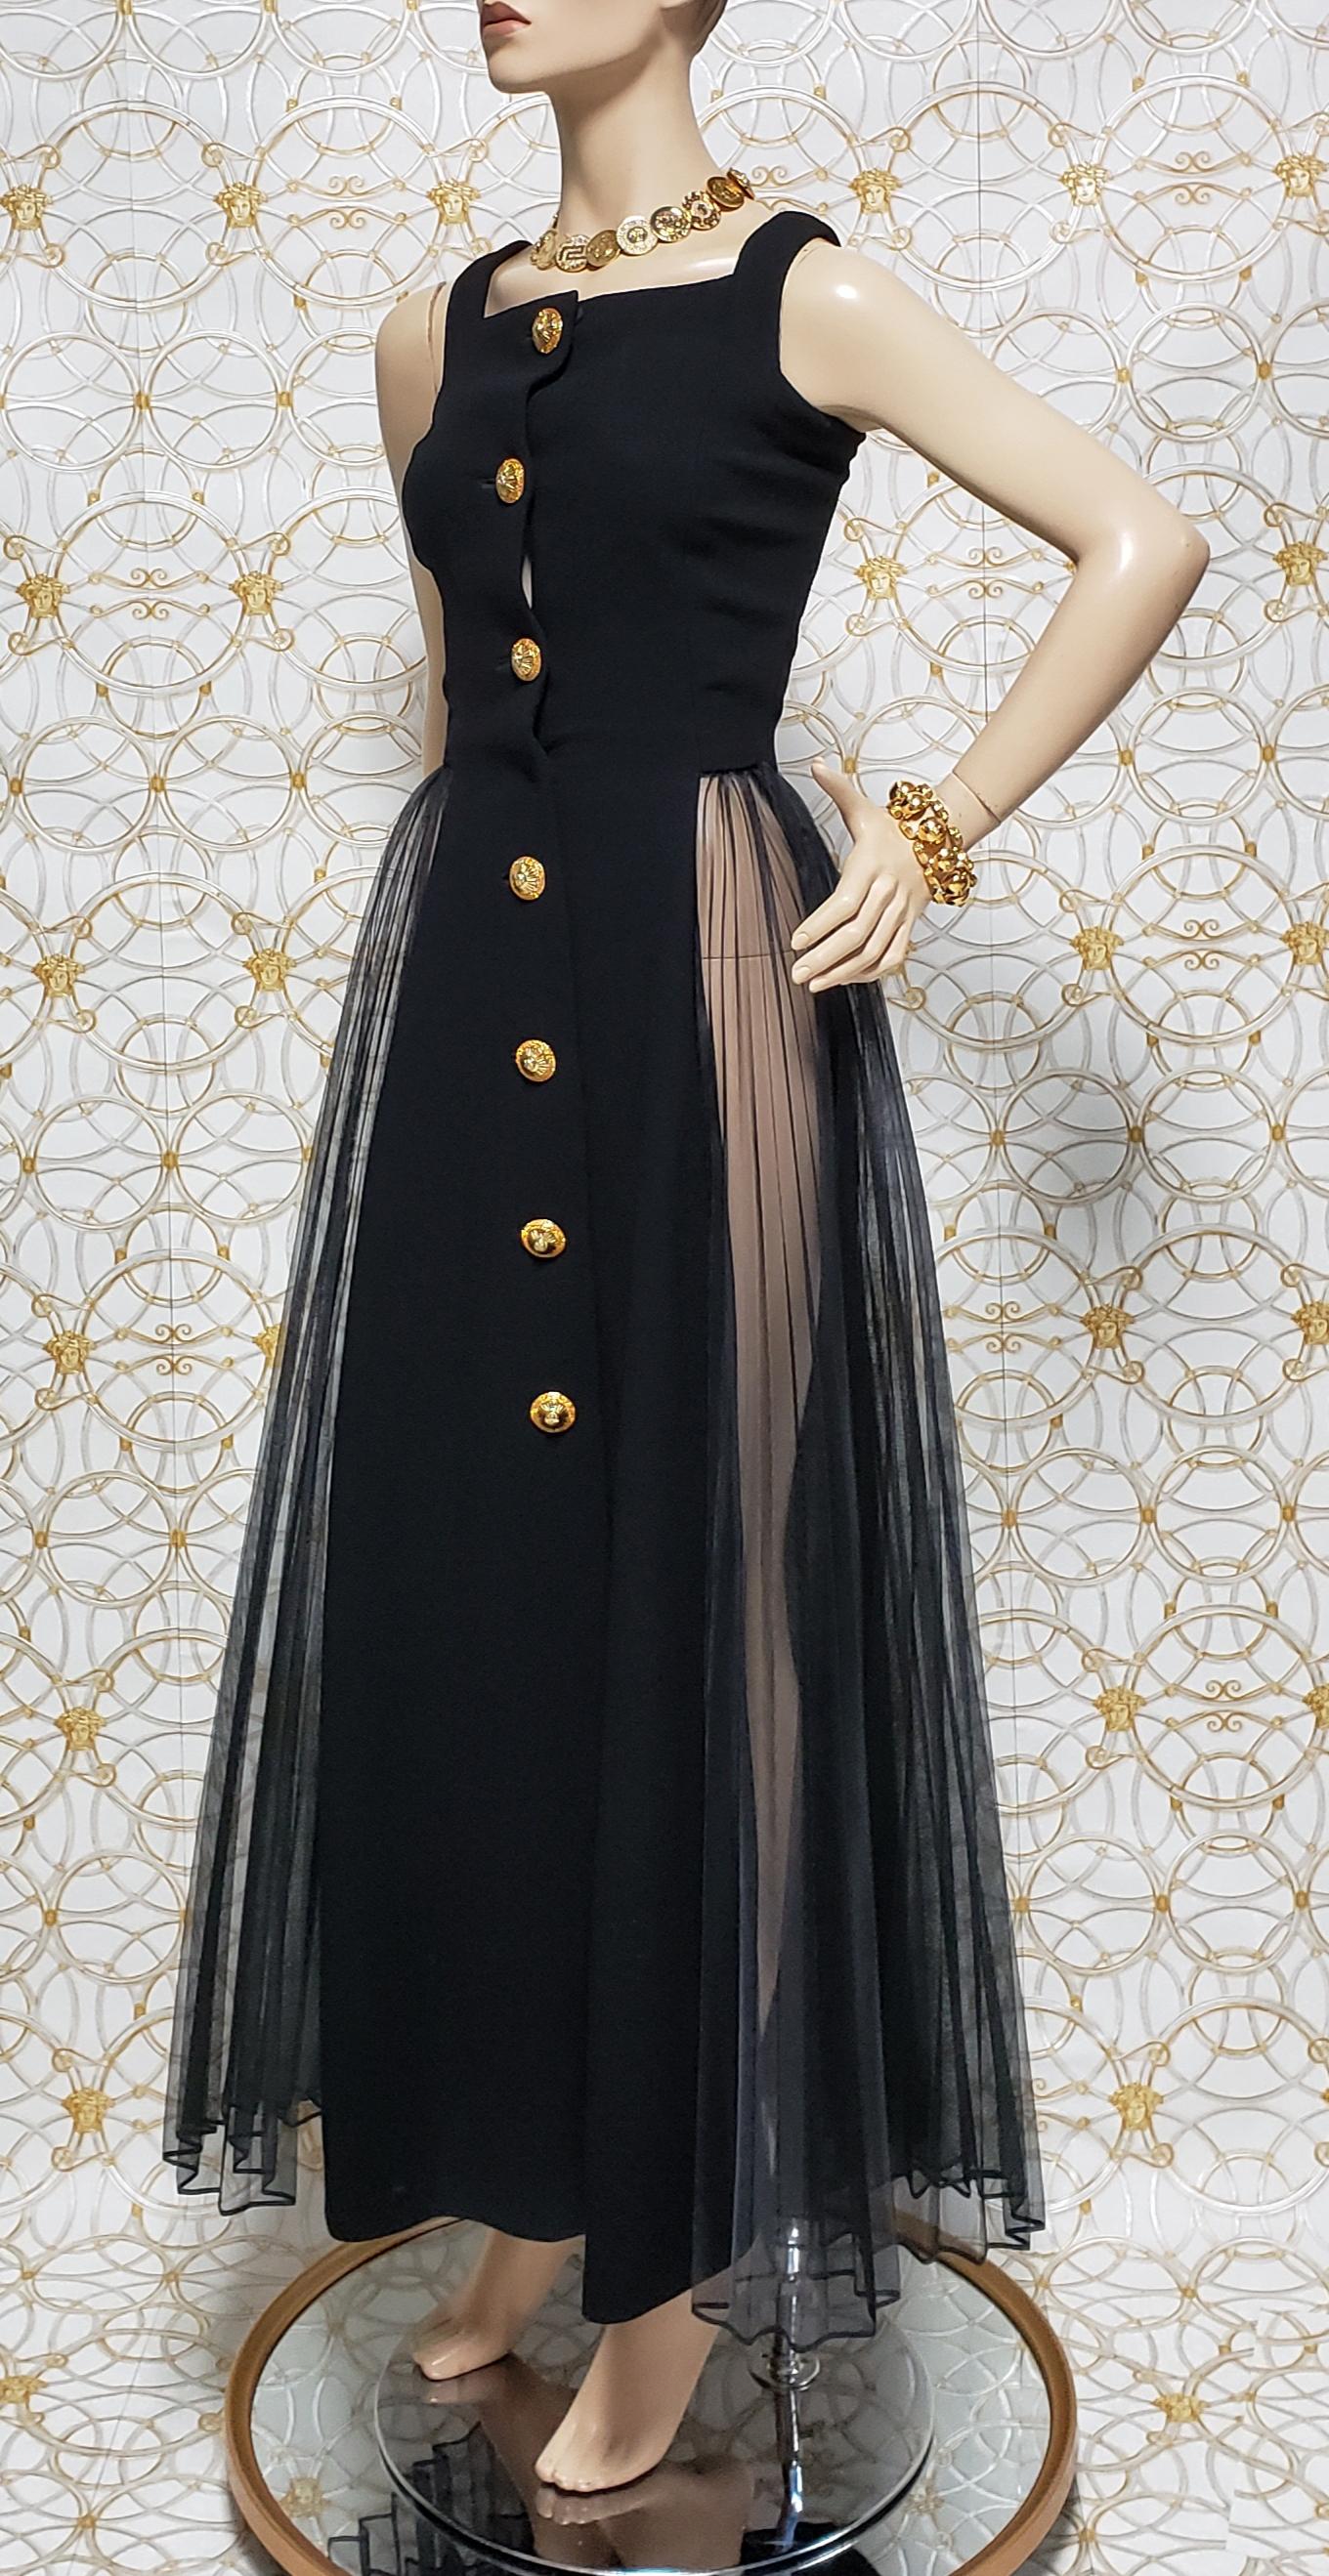 Iconic Museum-worthy GIANNI VERSACE Atelier Long Black Dress In Excellent Condition For Sale In Montgomery, TX